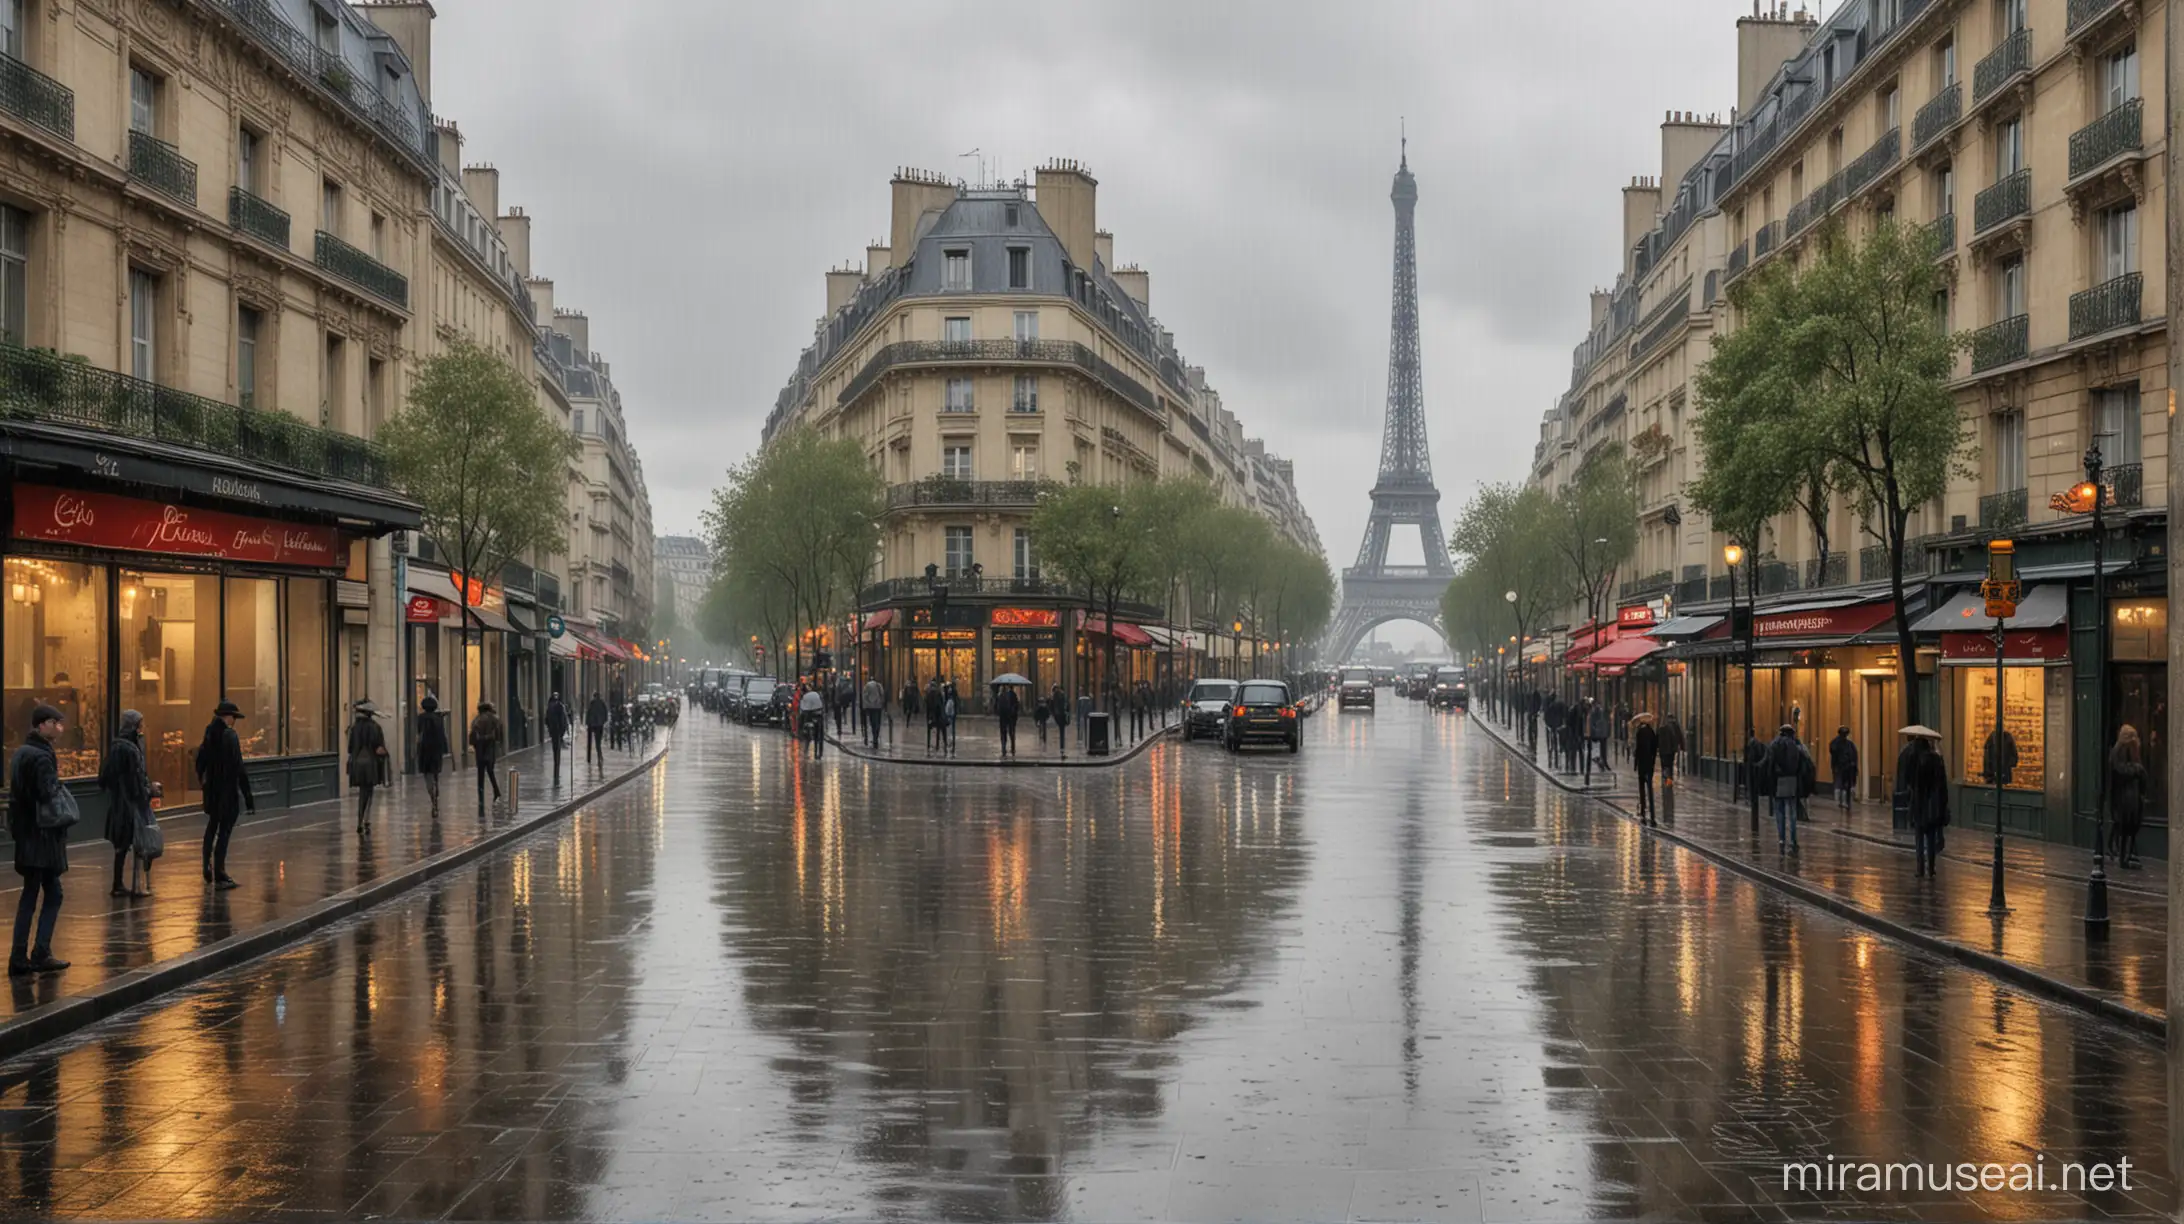 Scenery of Paris on a rainy day. Feels like a landscape painting by Claude Monet.